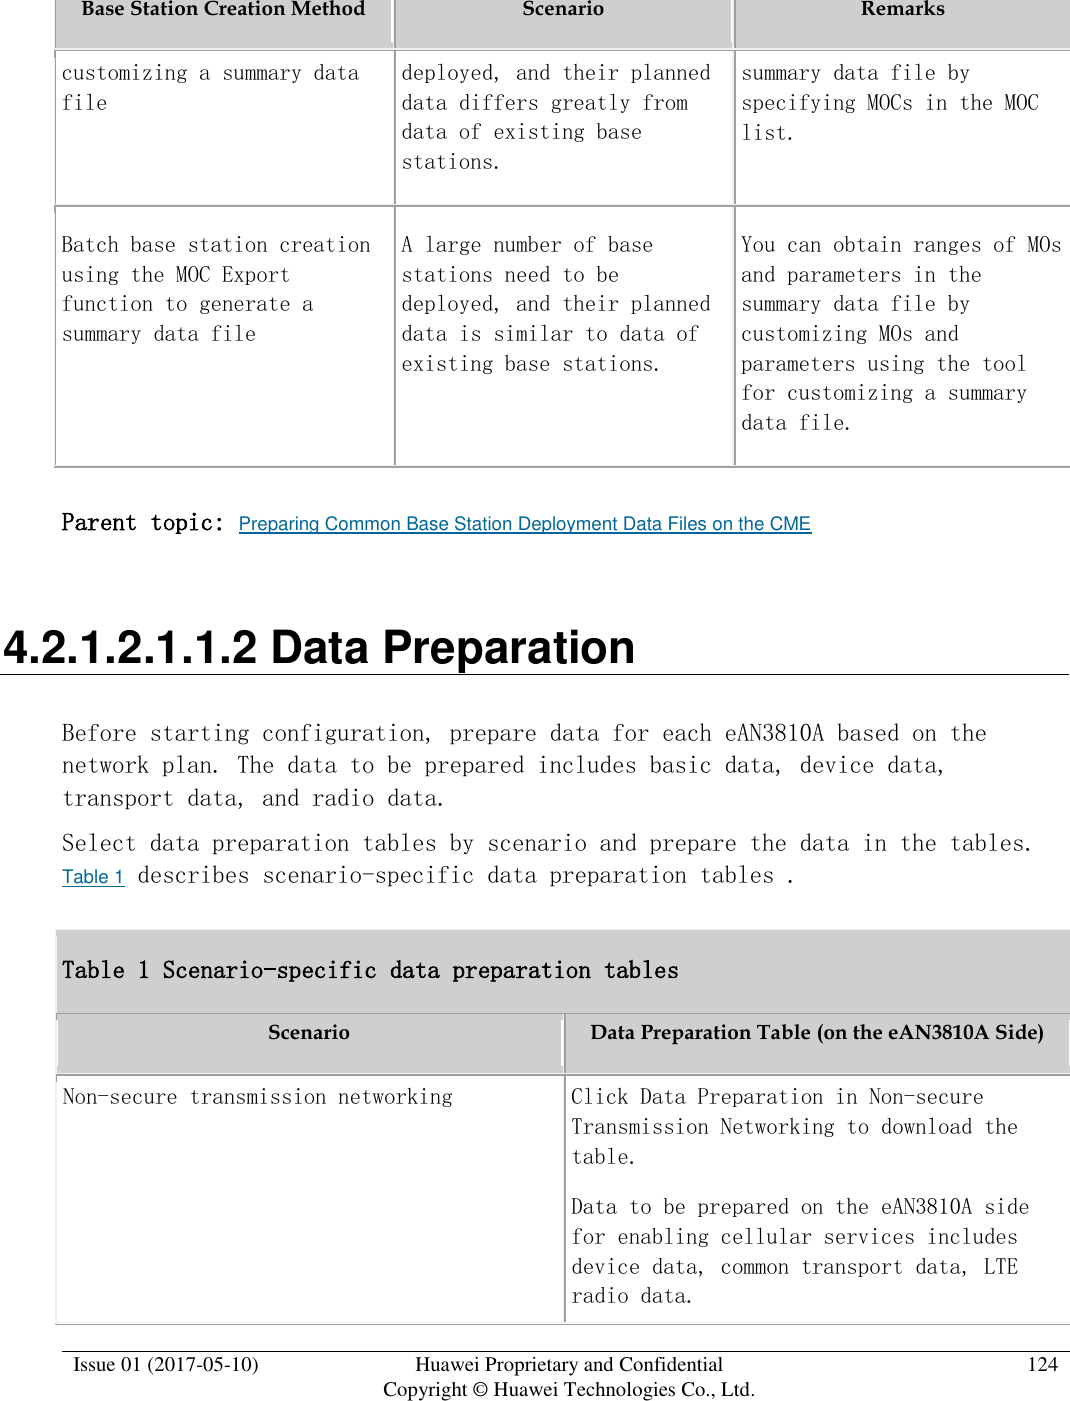  Issue 01 (2017-05-10) Huawei Proprietary and Confidential      Copyright © Huawei Technologies Co., Ltd. 124  Base Station Creation Method Scenario Remarks customizing a summary data file deployed, and their planned data differs greatly from data of existing base stations. summary data file by specifying MOCs in the MOC list. Batch base station creation using the MOC Export function to generate a summary data file A large number of base stations need to be deployed, and their planned data is similar to data of existing base stations. You can obtain ranges of MOs and parameters in the summary data file by customizing MOs and parameters using the tool for customizing a summary data file. Parent topic: Preparing Common Base Station Deployment Data Files on the CME 4.2.1.2.1.1.2 Data Preparation Before starting configuration, prepare data for each eAN3810A based on the network plan. The data to be prepared includes basic data, device data, transport data, and radio data.  Select data preparation tables by scenario and prepare the data in the tables. Table 1 describes scenario-specific data preparation tables . Table 1 Scenario-specific data preparation tables Scenario Data Preparation Table (on the eAN3810A Side) Non-secure transmission networking Click Data Preparation in Non-secure Transmission Networking to download the table.  Data to be prepared on the eAN3810A side for enabling cellular services includes device data, common transport data, LTE radio data. 